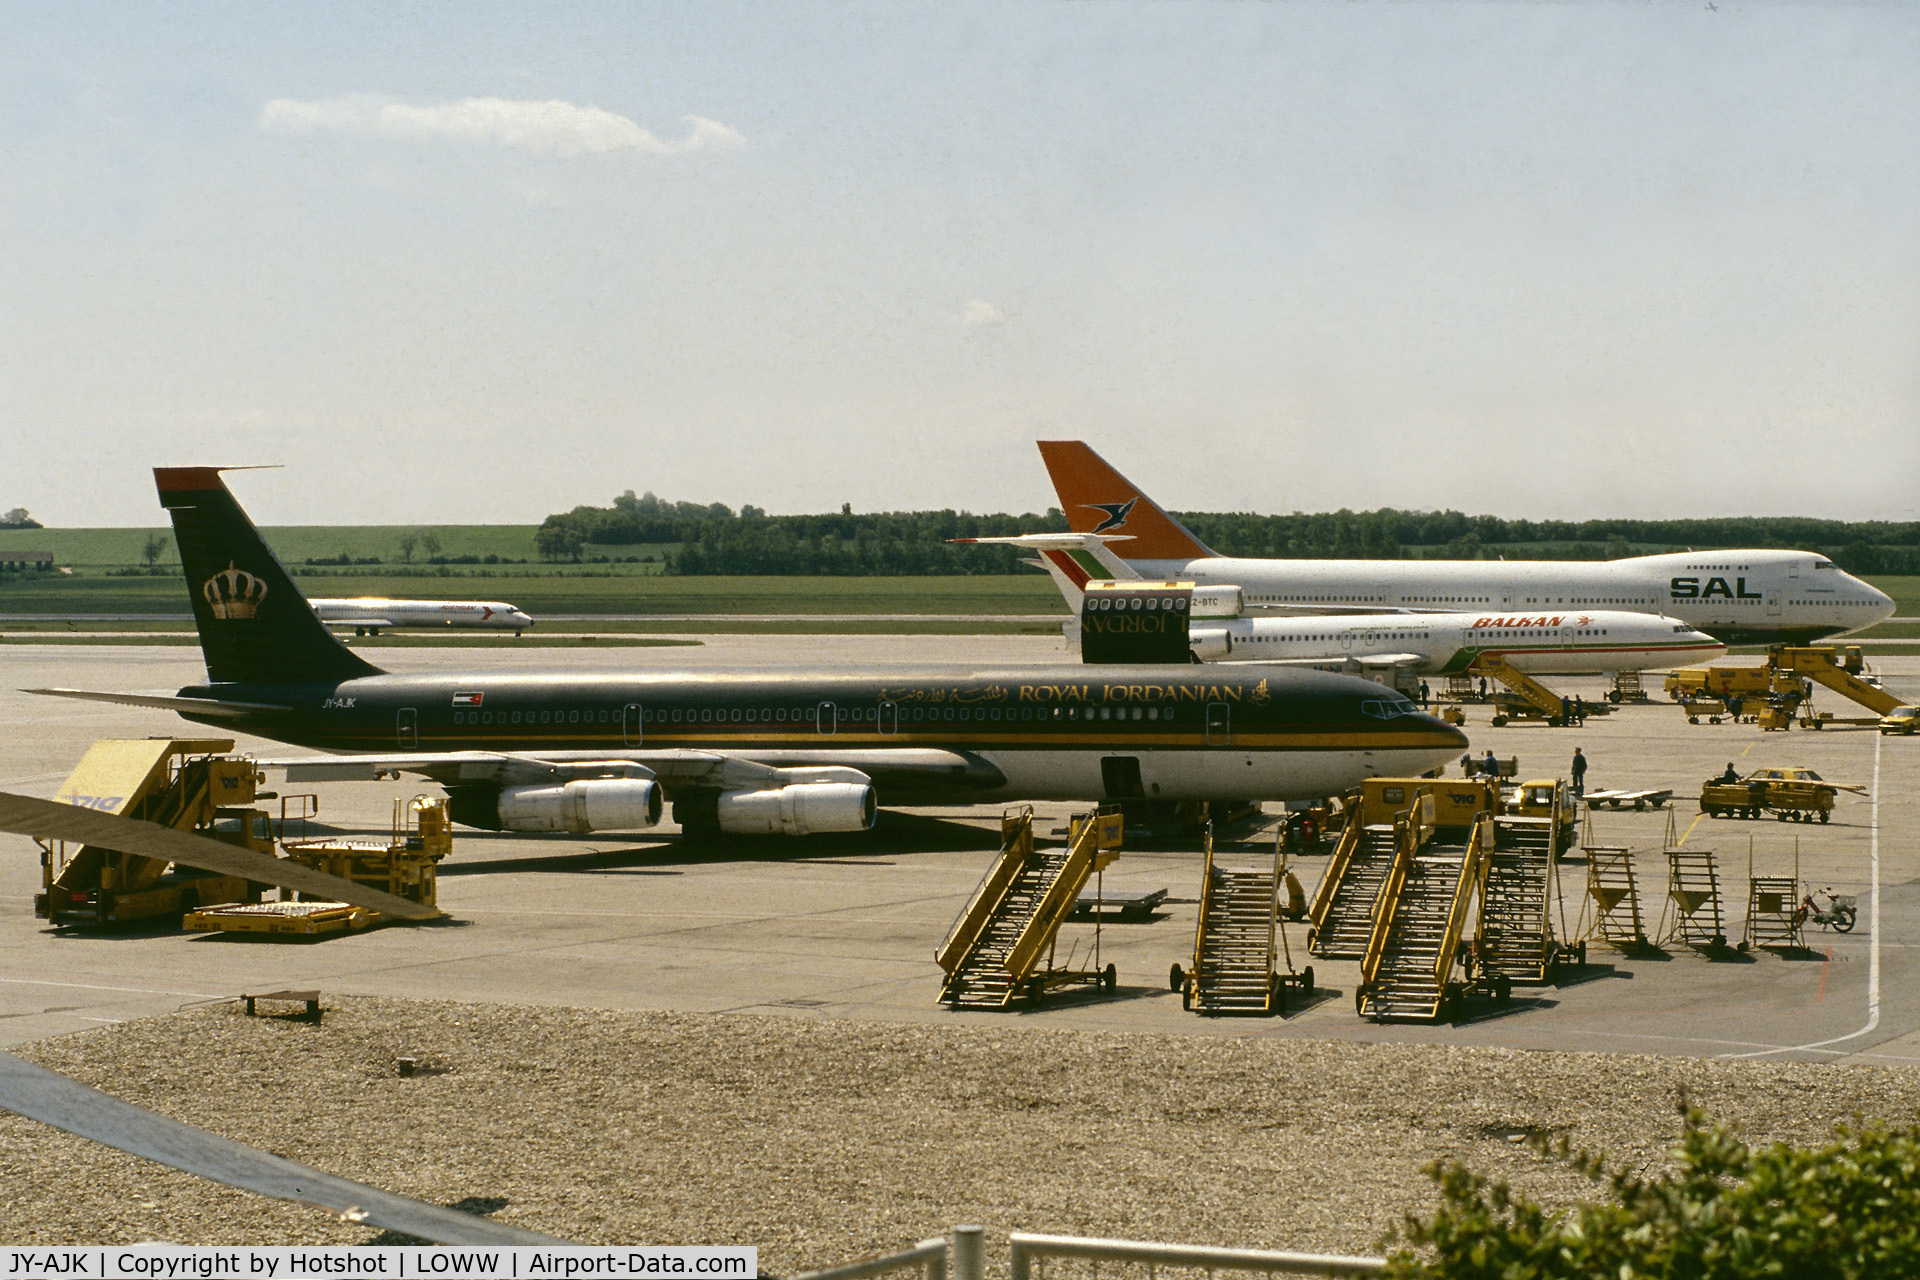 JY-AJK, 1966 Boeing 707-384C C/N 18948, Saturday afternoon was very busy at Vienna these days; besides the Royal Jordanian Cargo 707, there was a Balkan Airways Tu-154M LZ-BTC and Springbok Boeing 747-200 ZS-SAM.